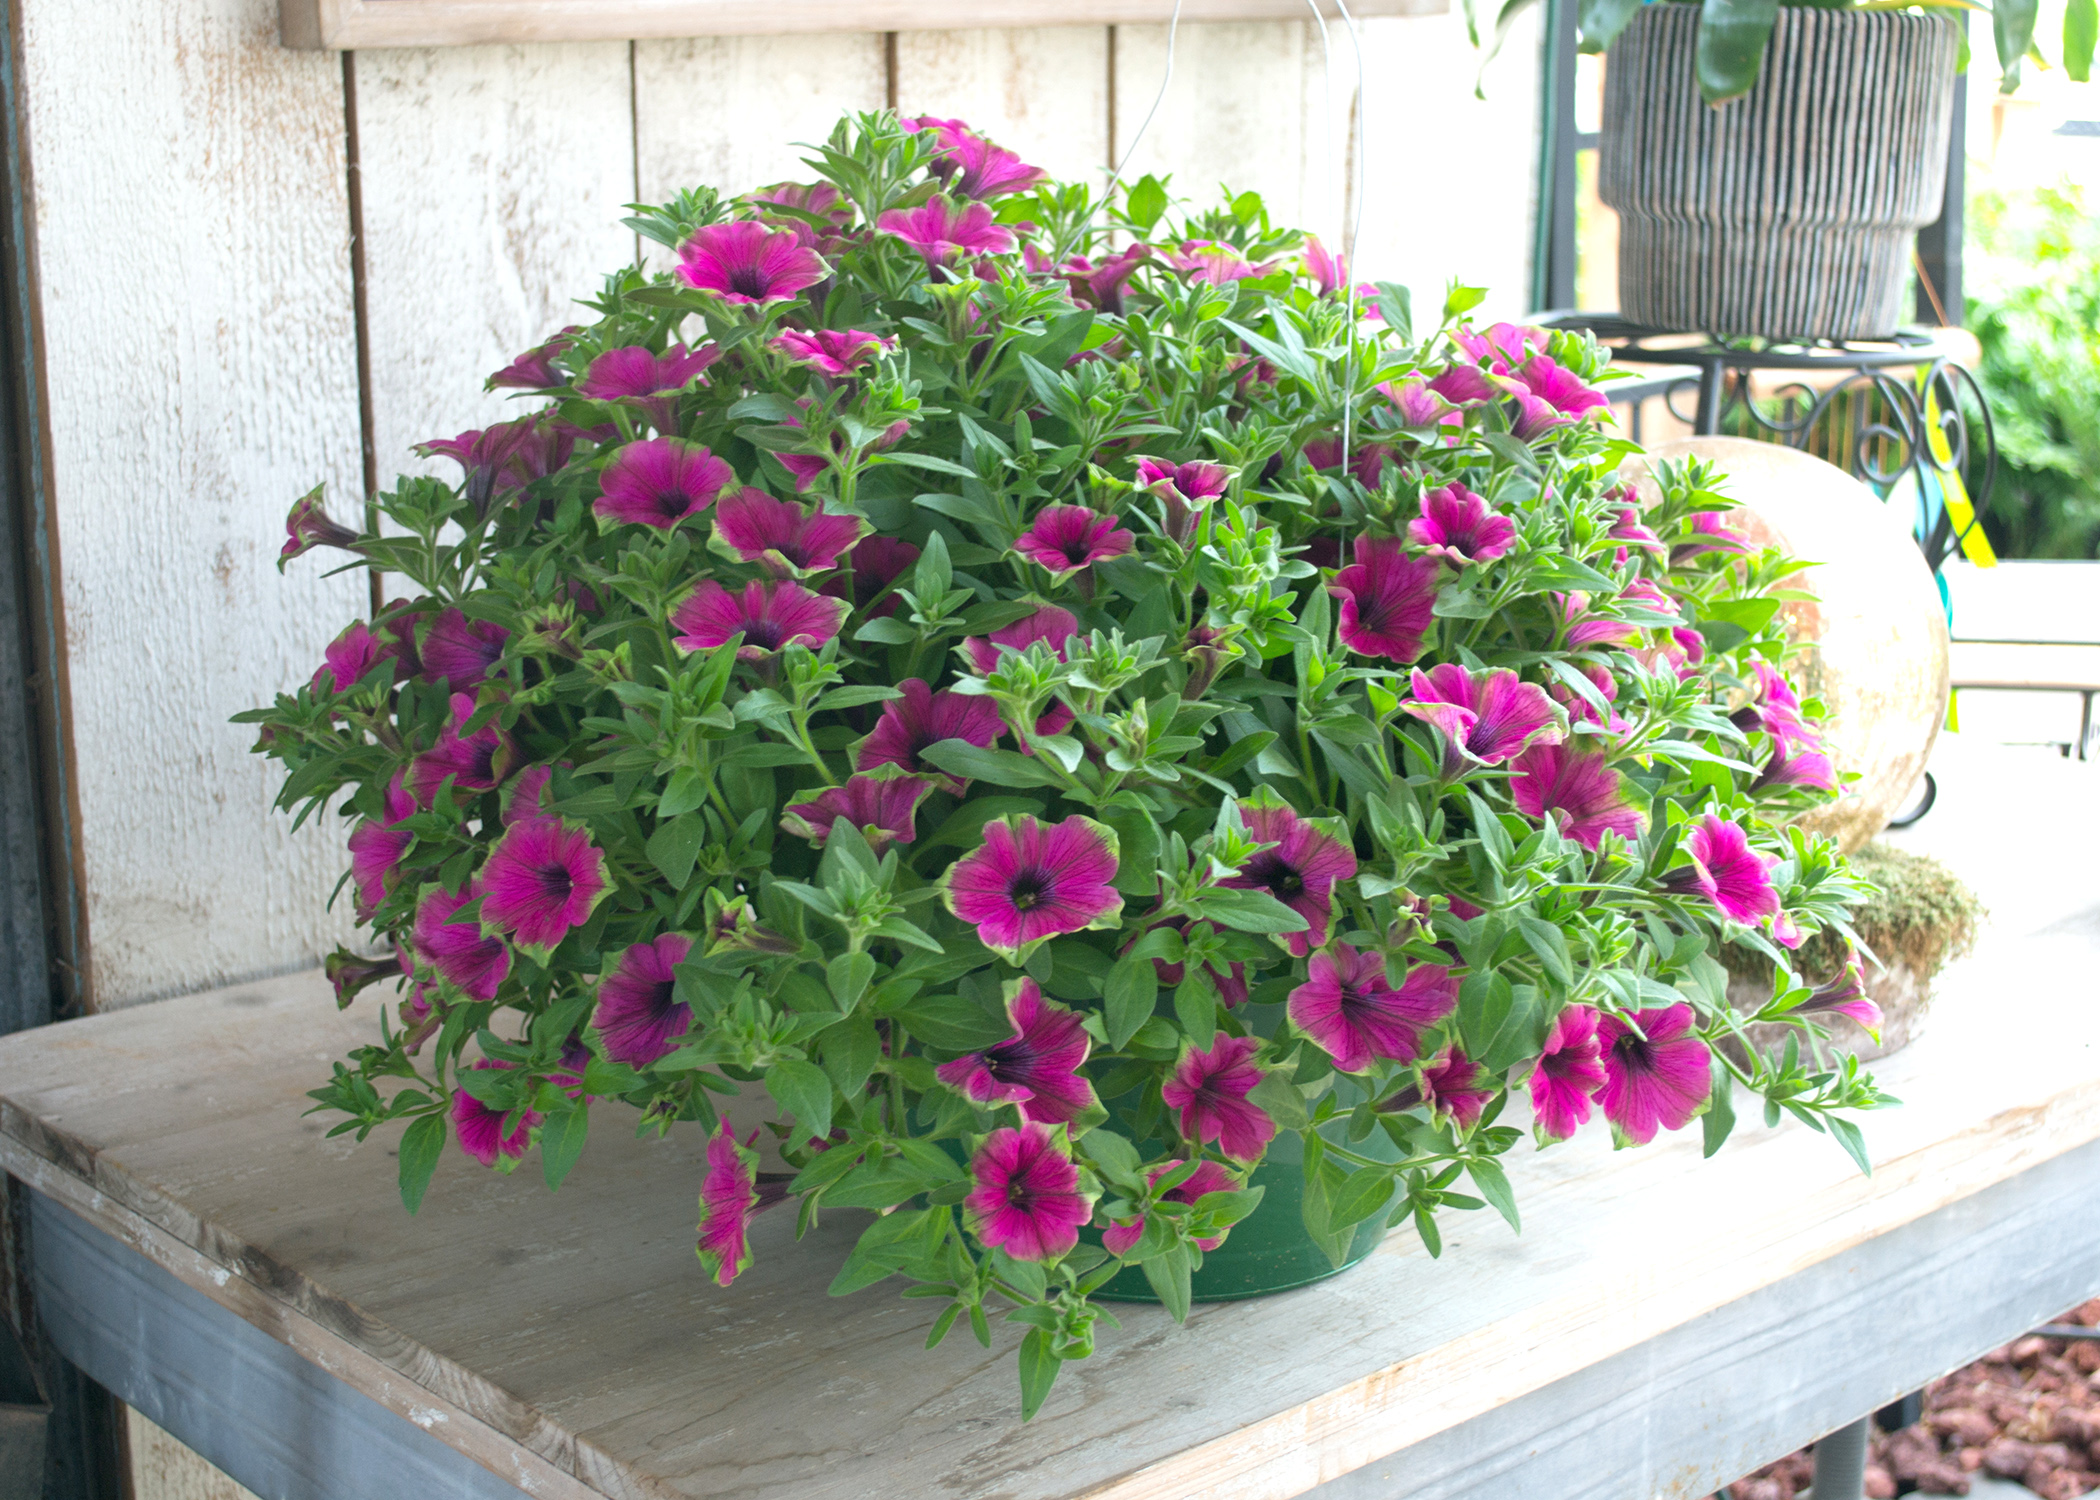 A plant covered with pink blooms sets on a wooden bench.